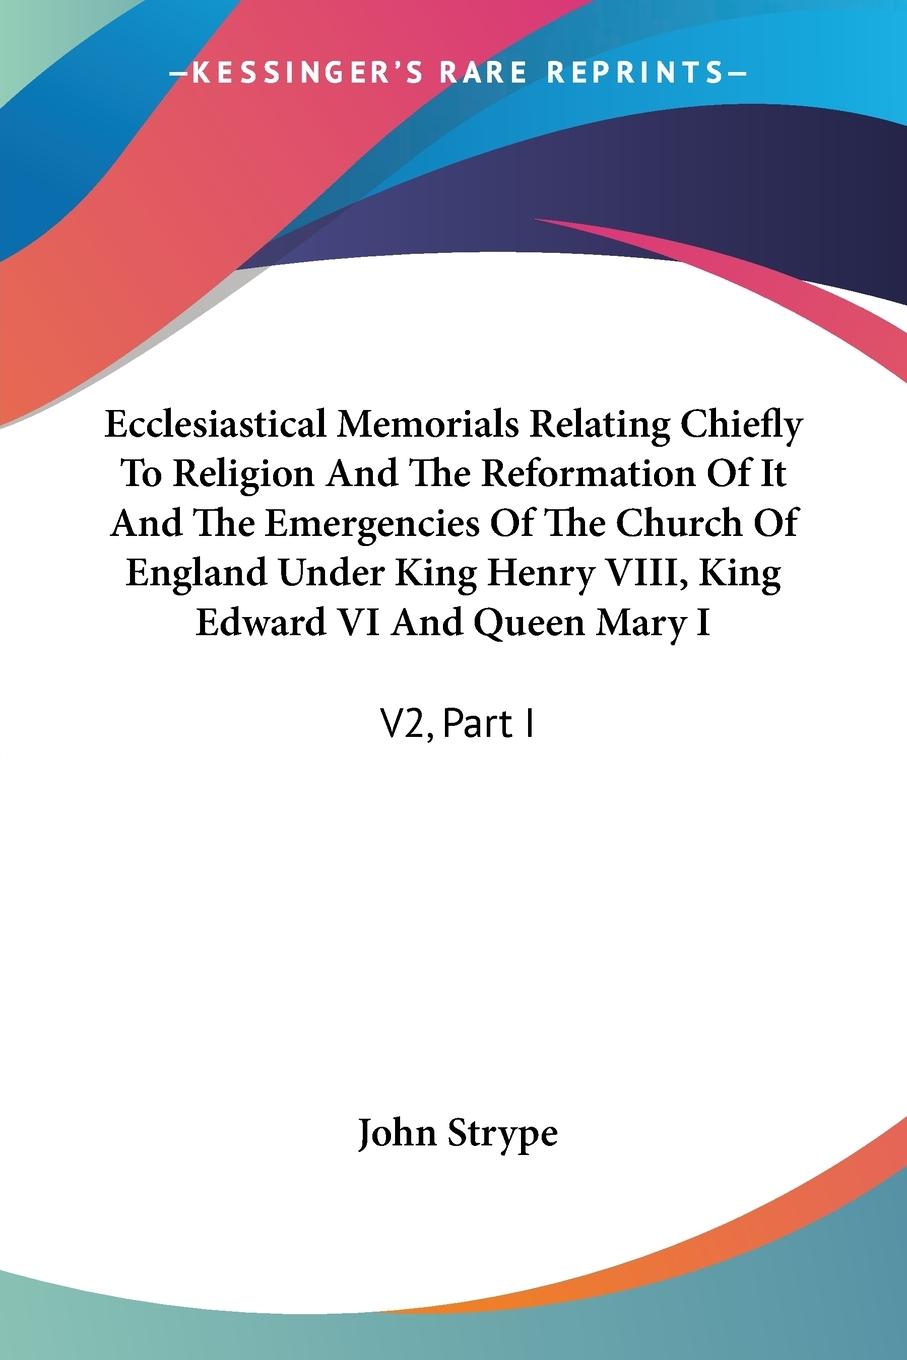 Ecclesiastical Memorials Relating Chiefly To Religion And The Reformation Of It And The Emergencies Of The Church Of England Under King Henry VIII, King Edward VI And Queen Mary I - Strype, John